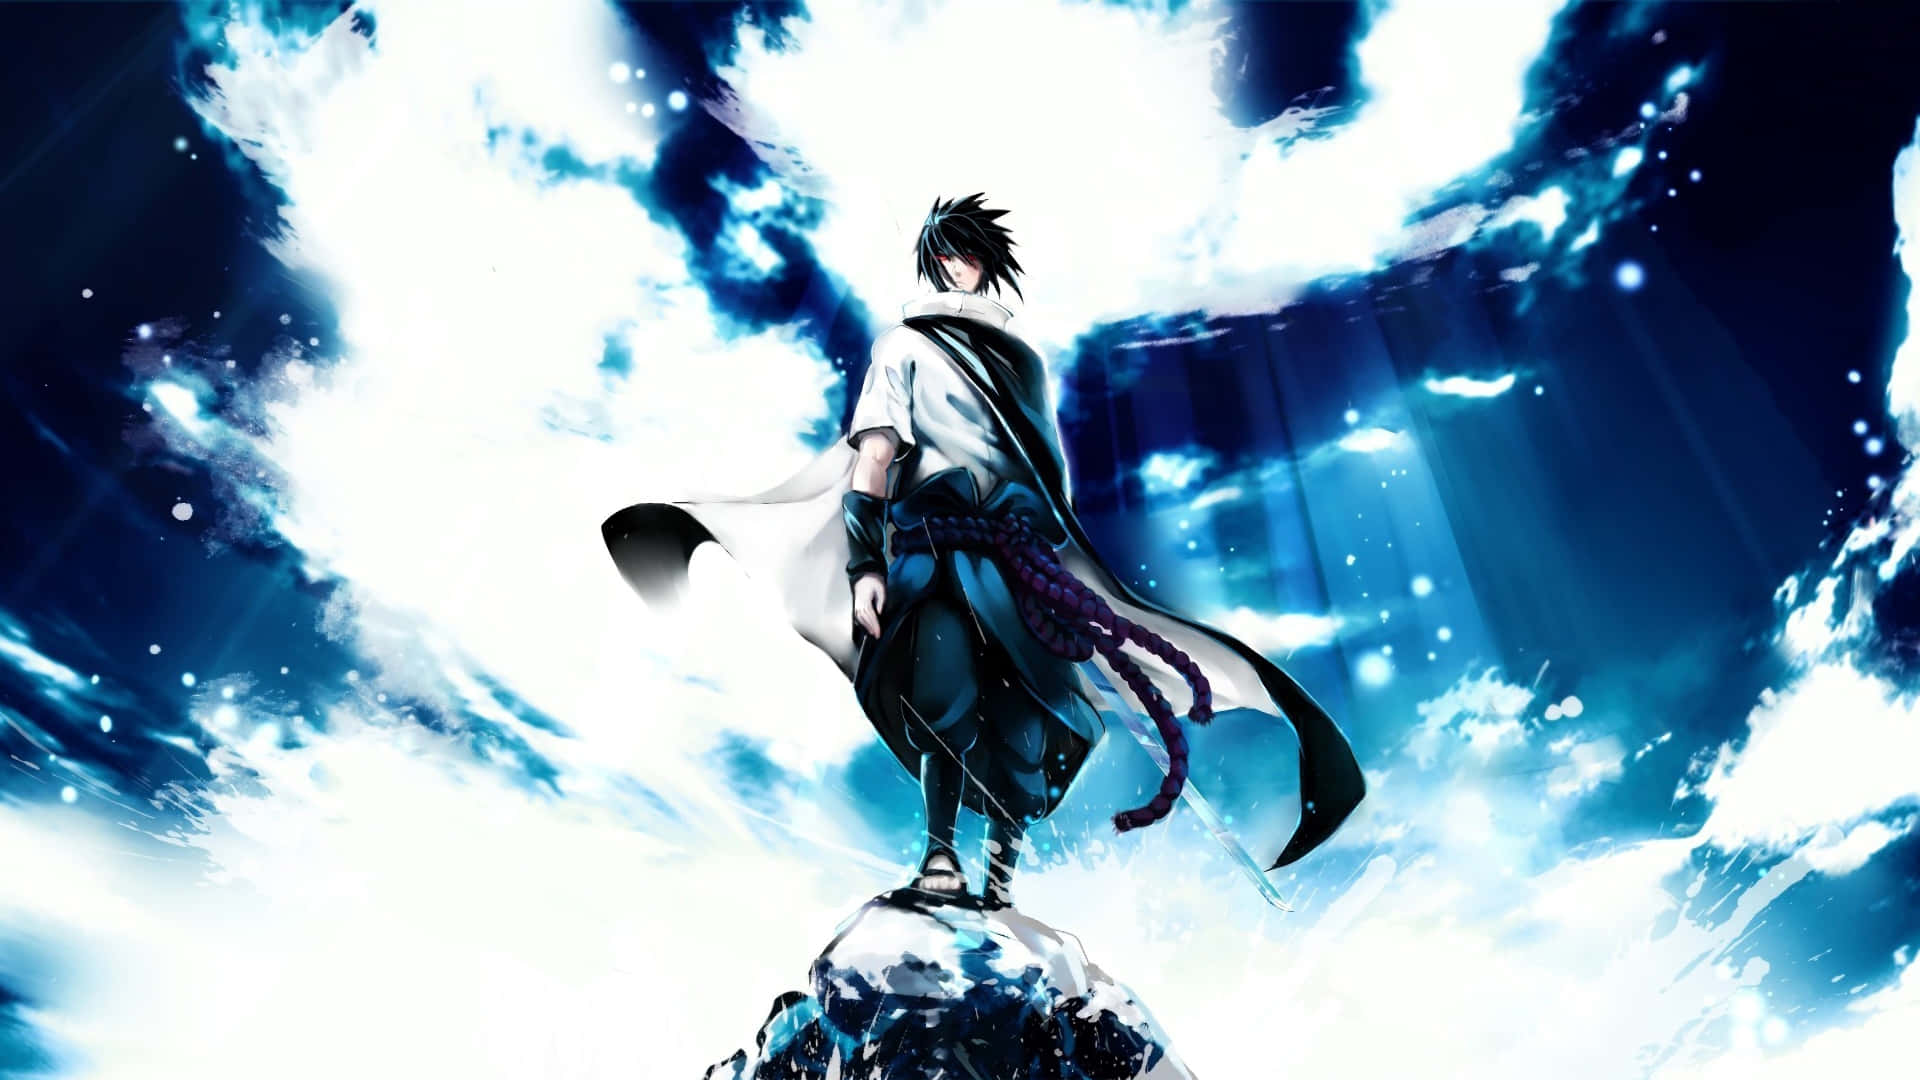 Get Ready for a Thrilling Adventure with Blue Sasuke Wallpaper